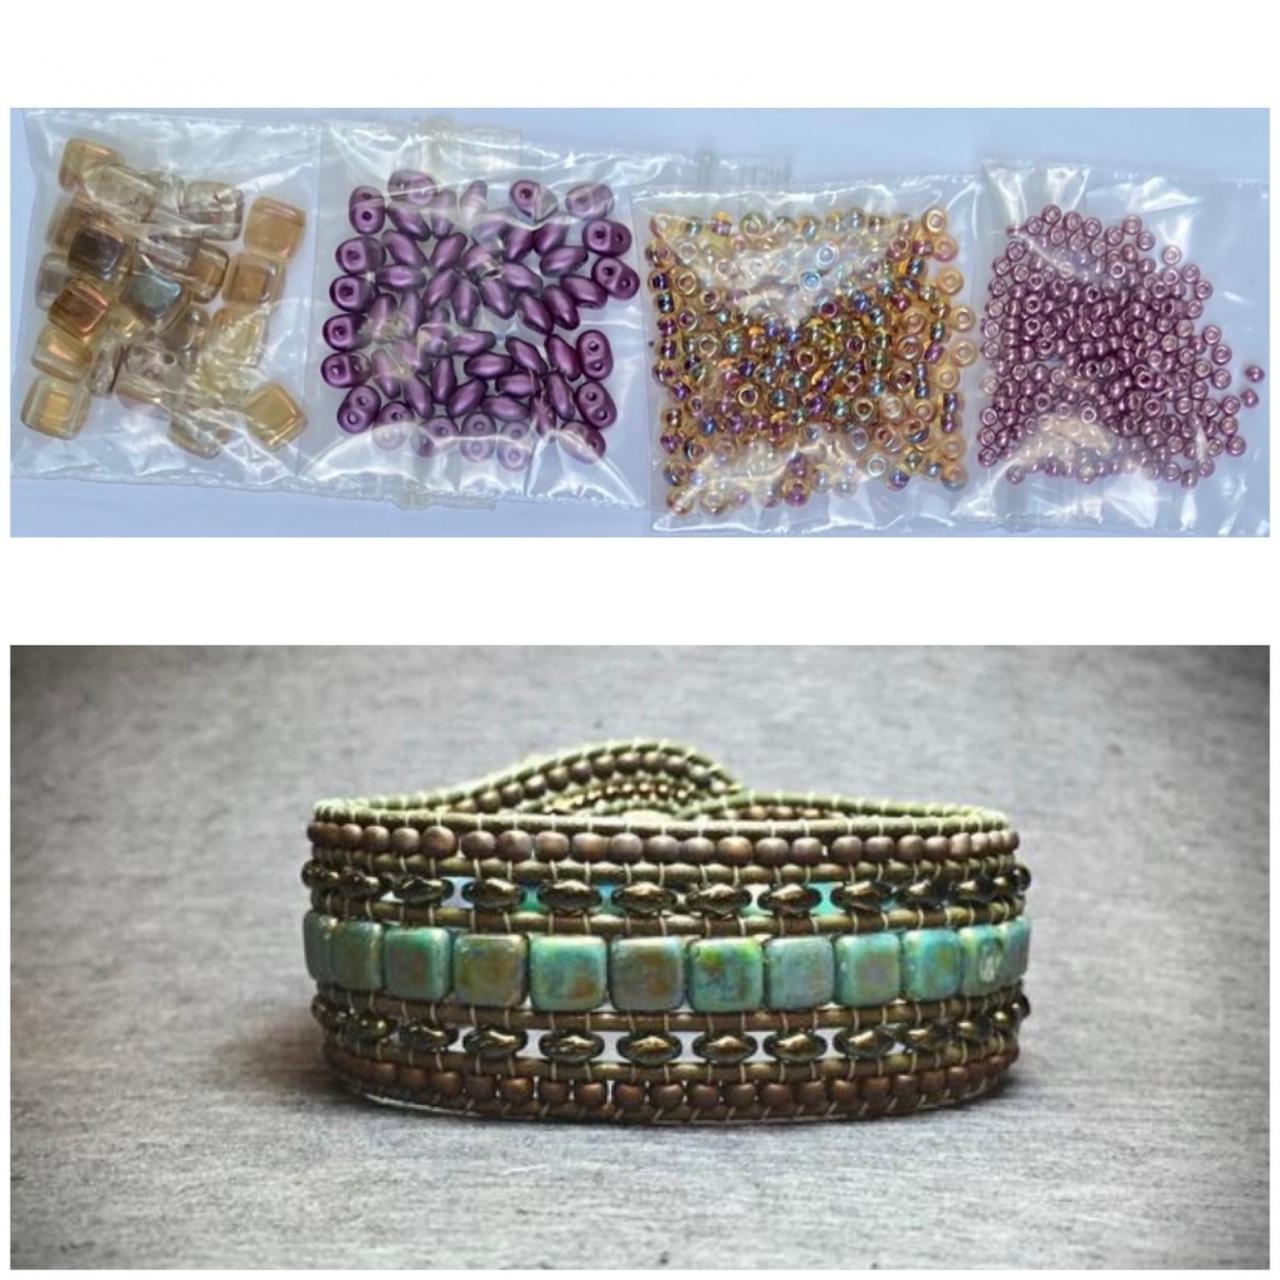 KIT Wide Leather Beaded Cuff Bonny Topaz Orchid Purple DIY Intermediate Instructions Complete NO Tools #18